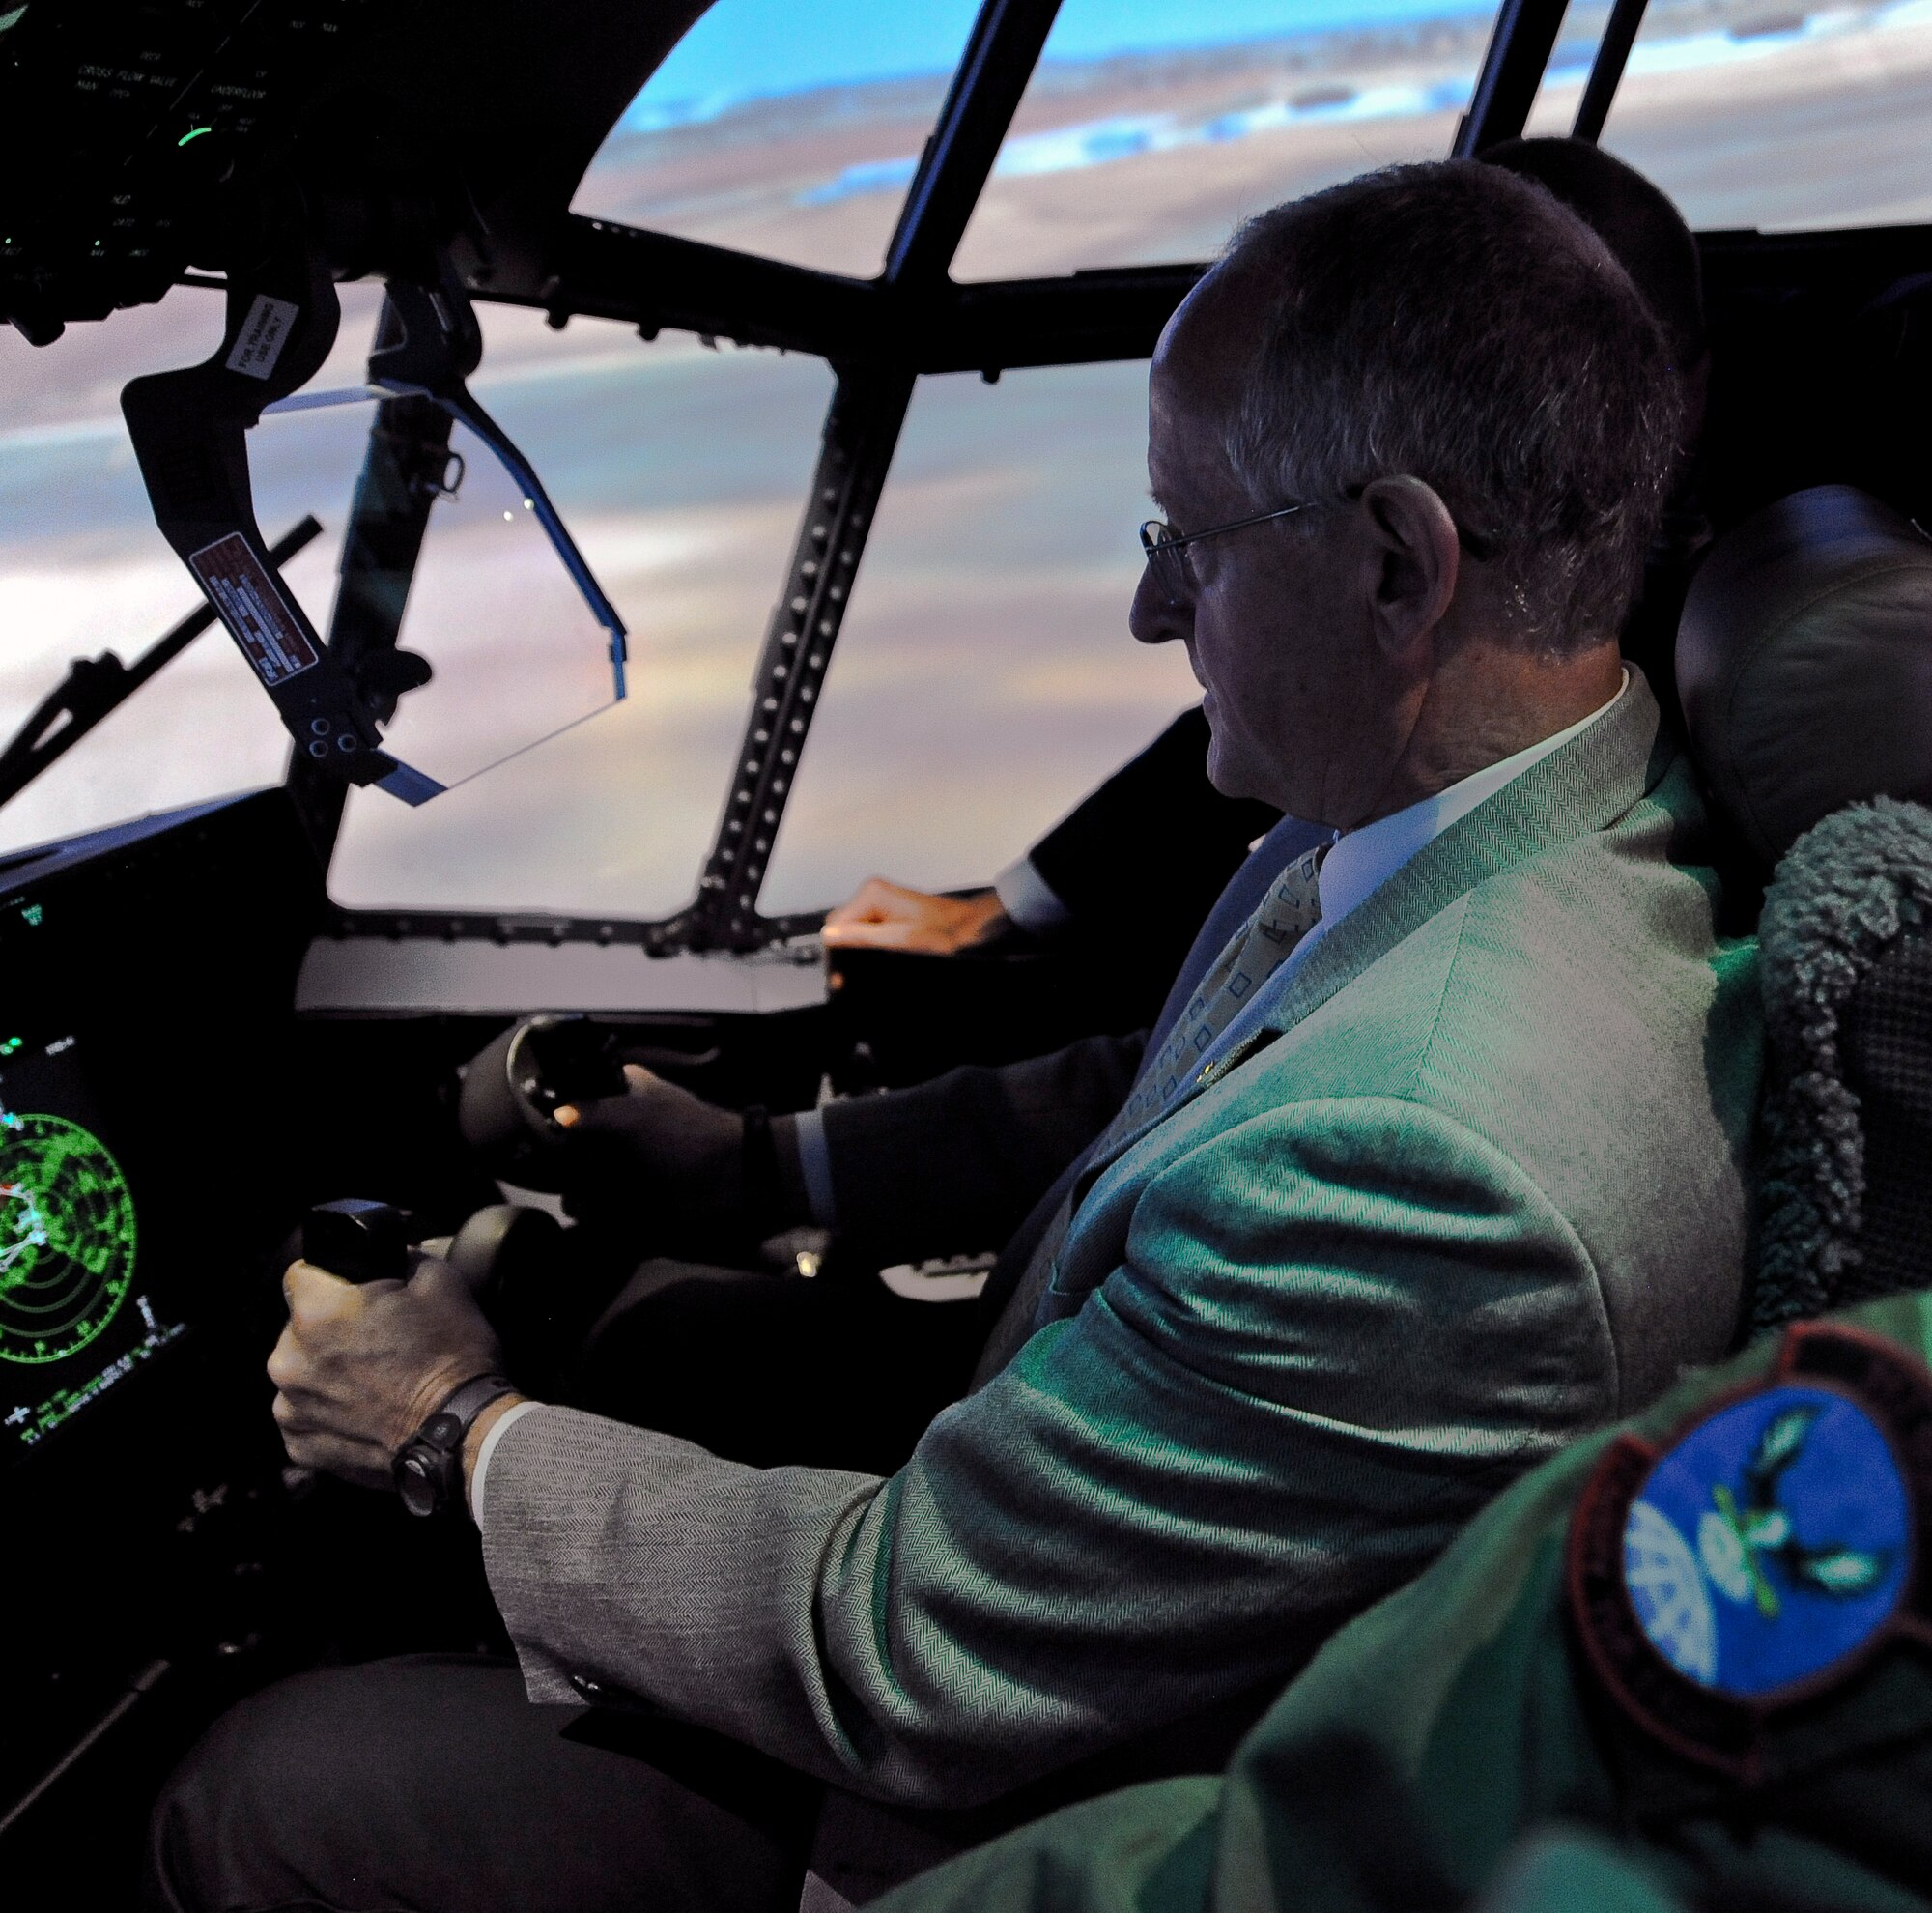 U.S. Rep. Mike Conaway operates the new C-130J Super Hercules simulator April 22, 2014, at Dyess Air Force Base, Texas. The cost to run the simulator is an estimated $850 an hour, a savings of $1,500 compared to an approximated flying cost of $2,300 an hour, which will allow the 317th Airlift Group to save an approximate $3 million annually. Additionally, the simulator will save the 317th Airlift Group approximately $400,000 annually in personnel and travel costs by conducting required training onsite.   (U.S. Air Force photo by Airman 1st Class Kedesha Pennant/Released)